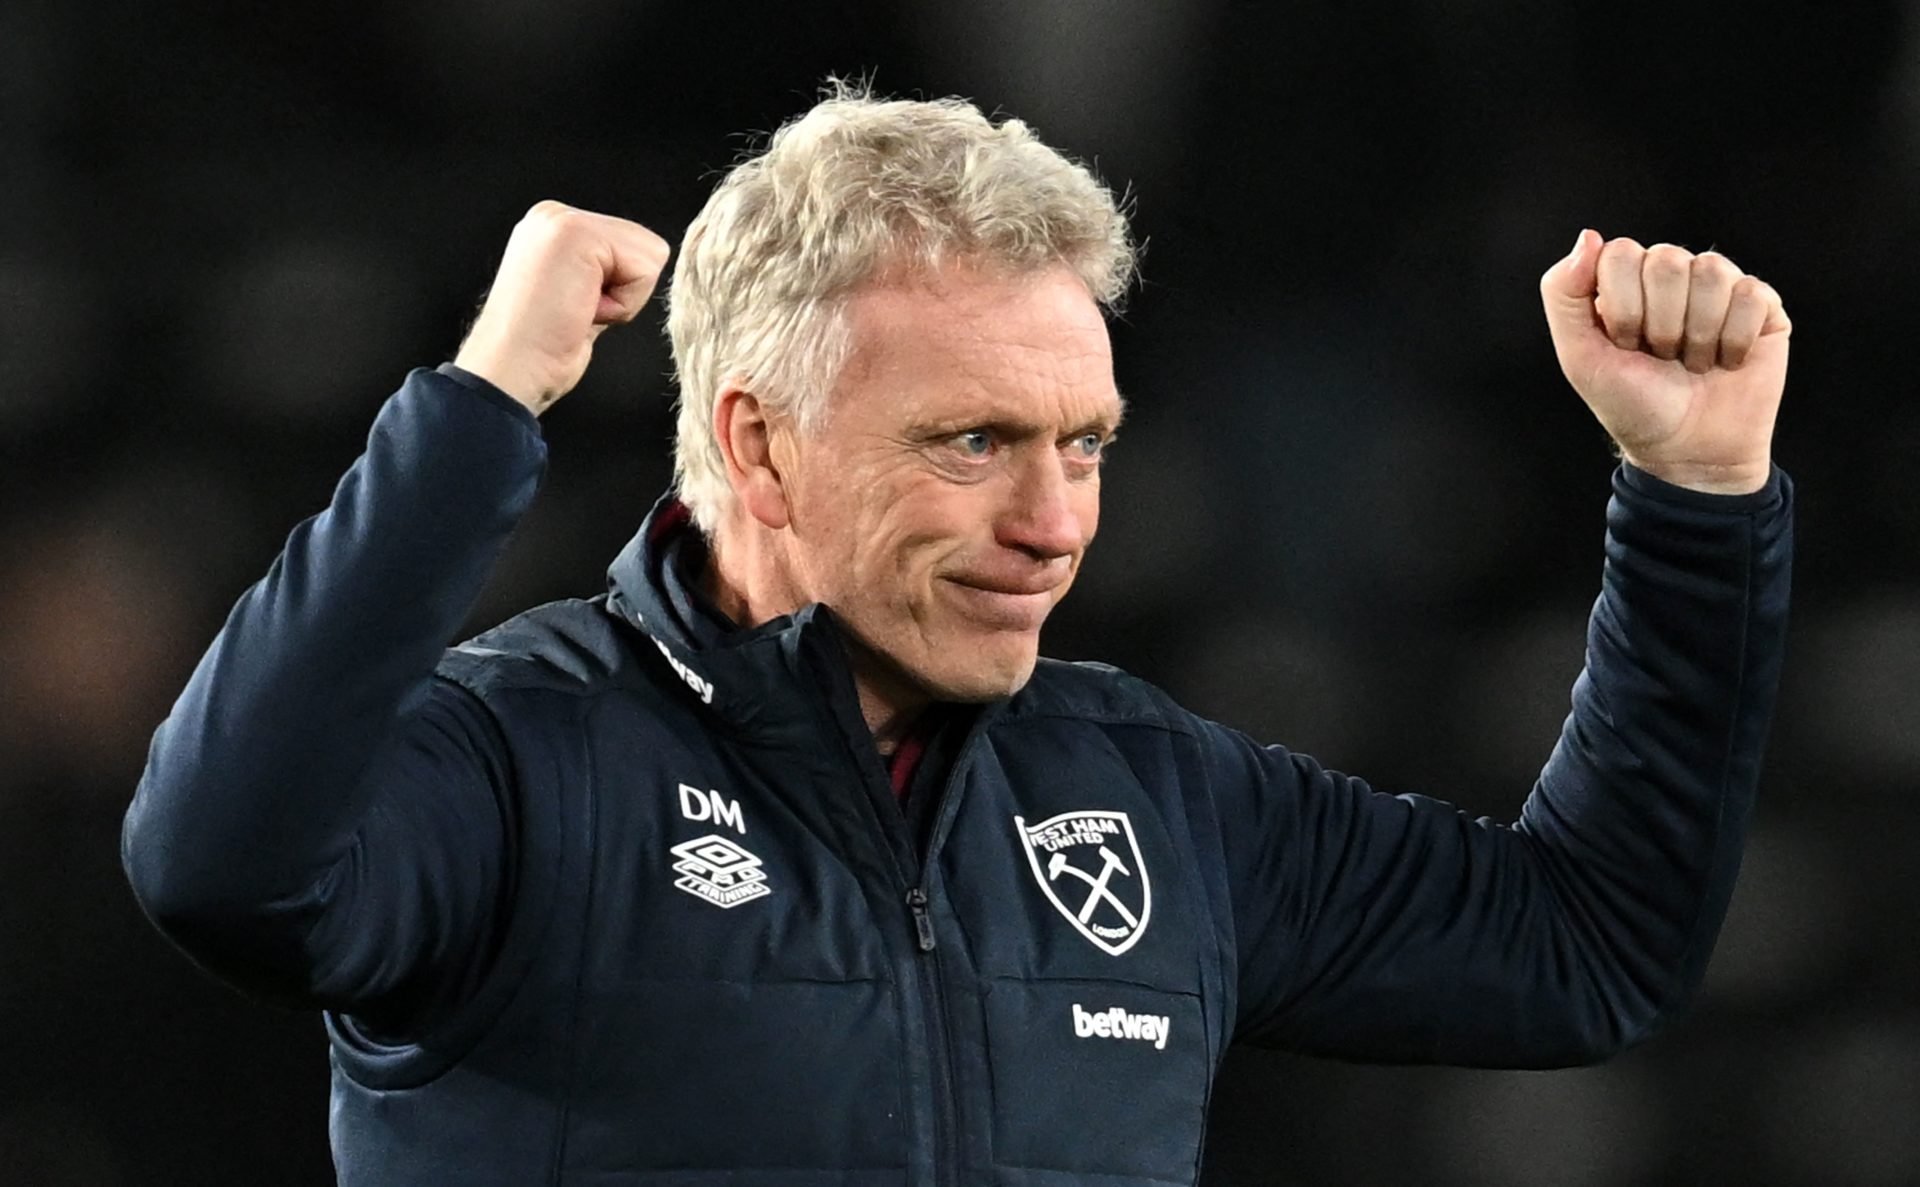 Moyes urges caution but gives deadline day West Ham transfer hope